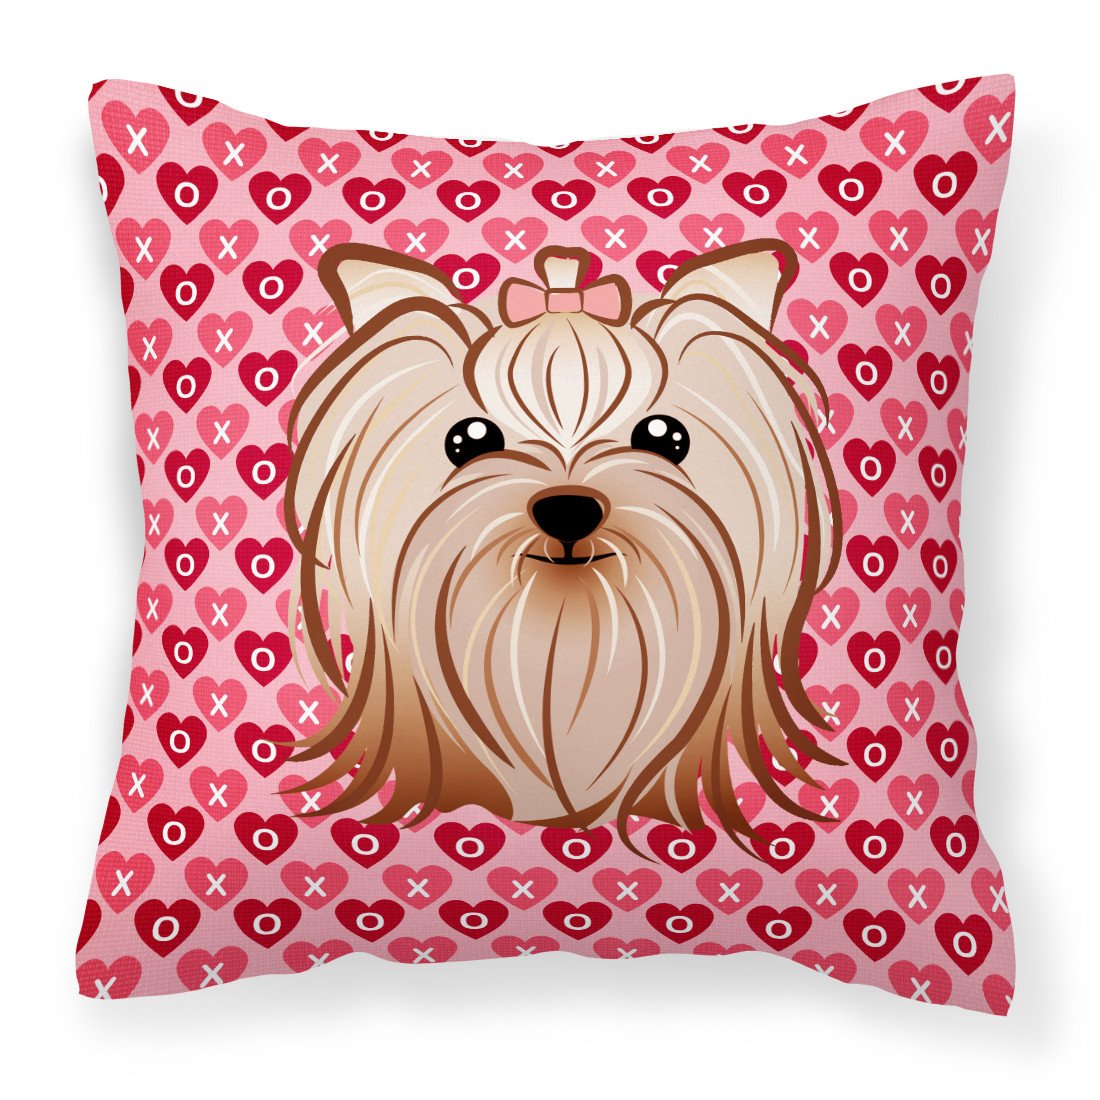 Yorkie Yorkishire Terrier Hearts Fabric Decorative Pillow BB5274PW1818 by Caroline's Treasures